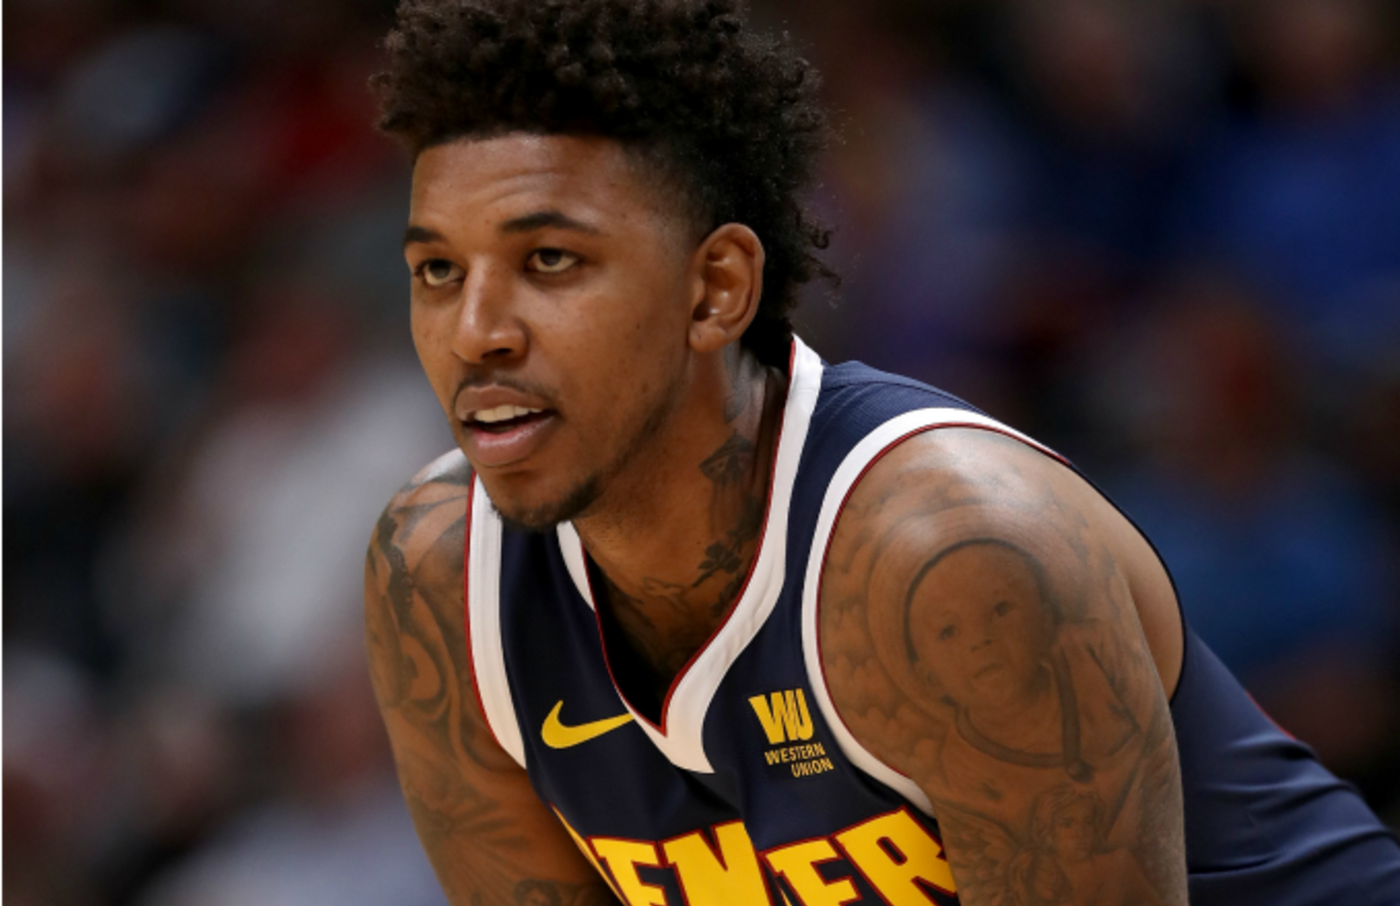 nick young jersey nuggets